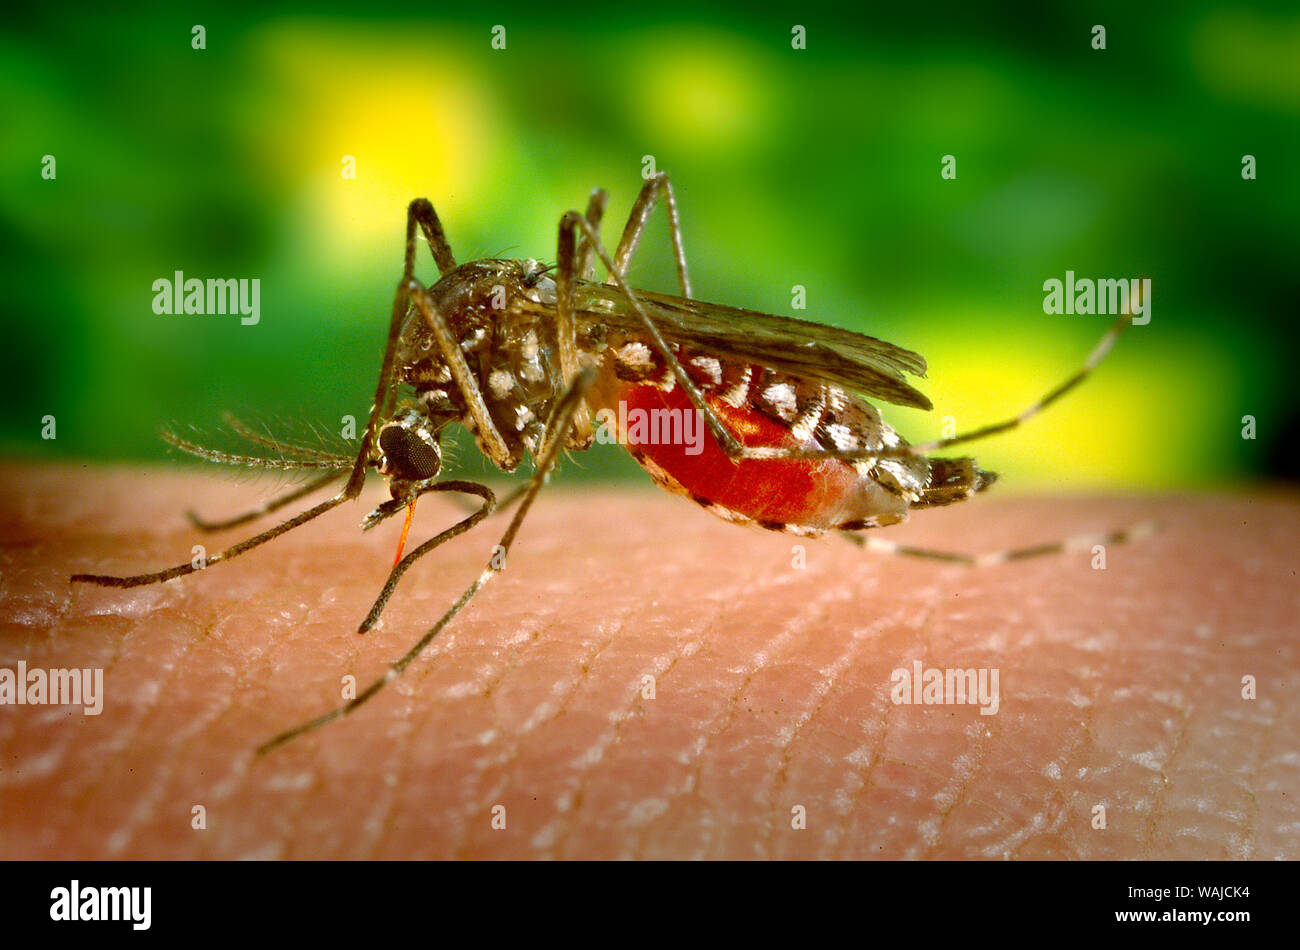 2005 - This photograph depicts a female Aedes aegypti mosquito, which is the primary vector for the spread of Dengue fever. Aedes aegypti is a domestic, day-biting mosquito that prefers to feed on humans; Dengue is spread by the female Aedes aegypt only, for the male does not bite. Stock Photo